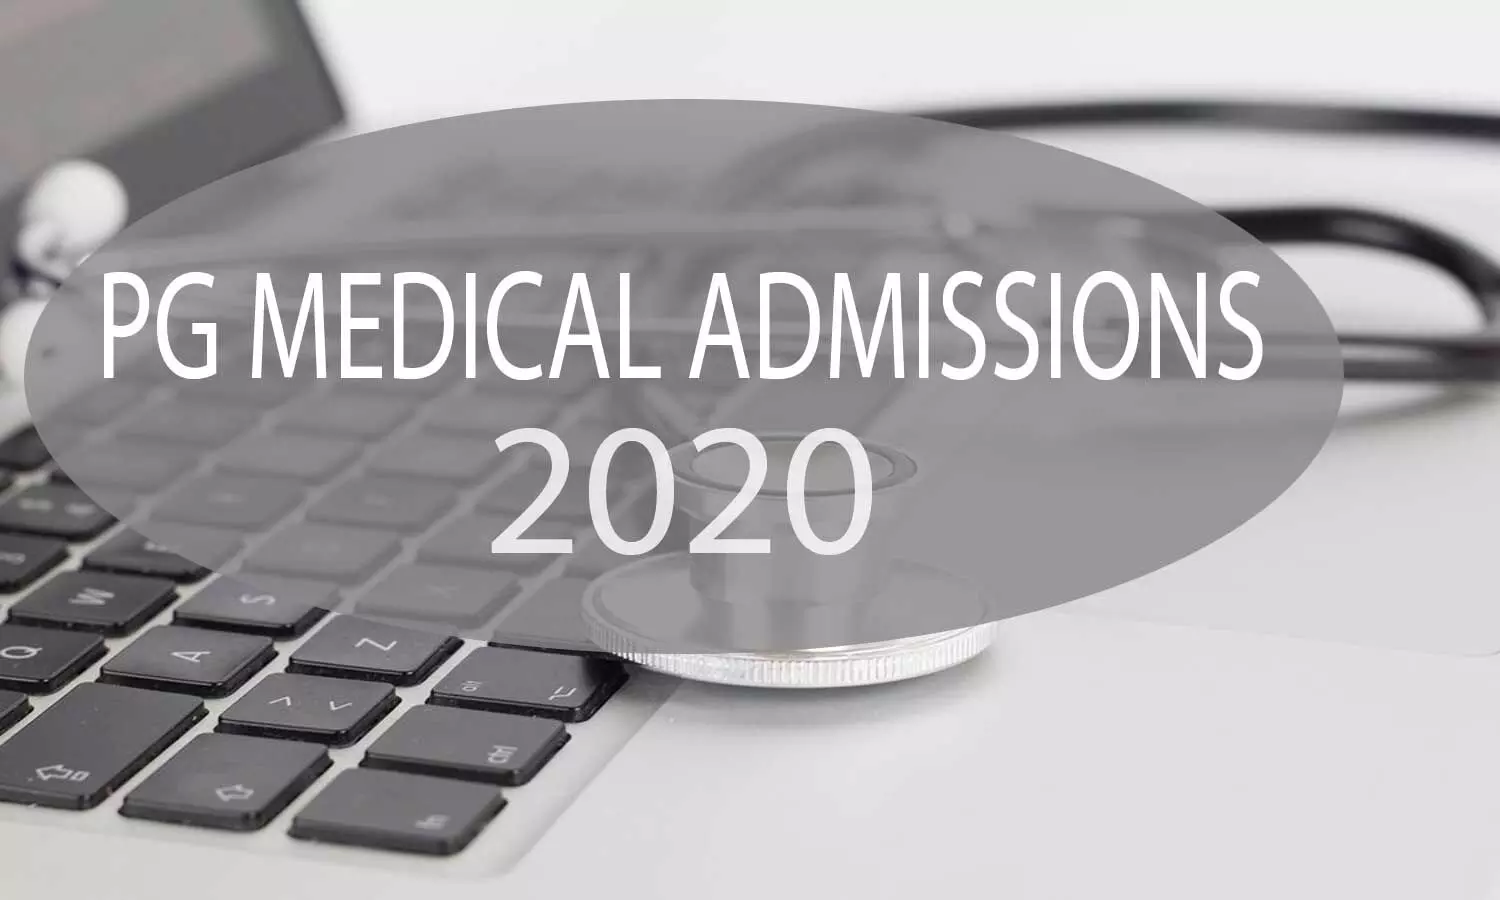 PG Medical Admissions in Tamil Nadu: Online registration for Govt, NRI Quota counselling from April 30th